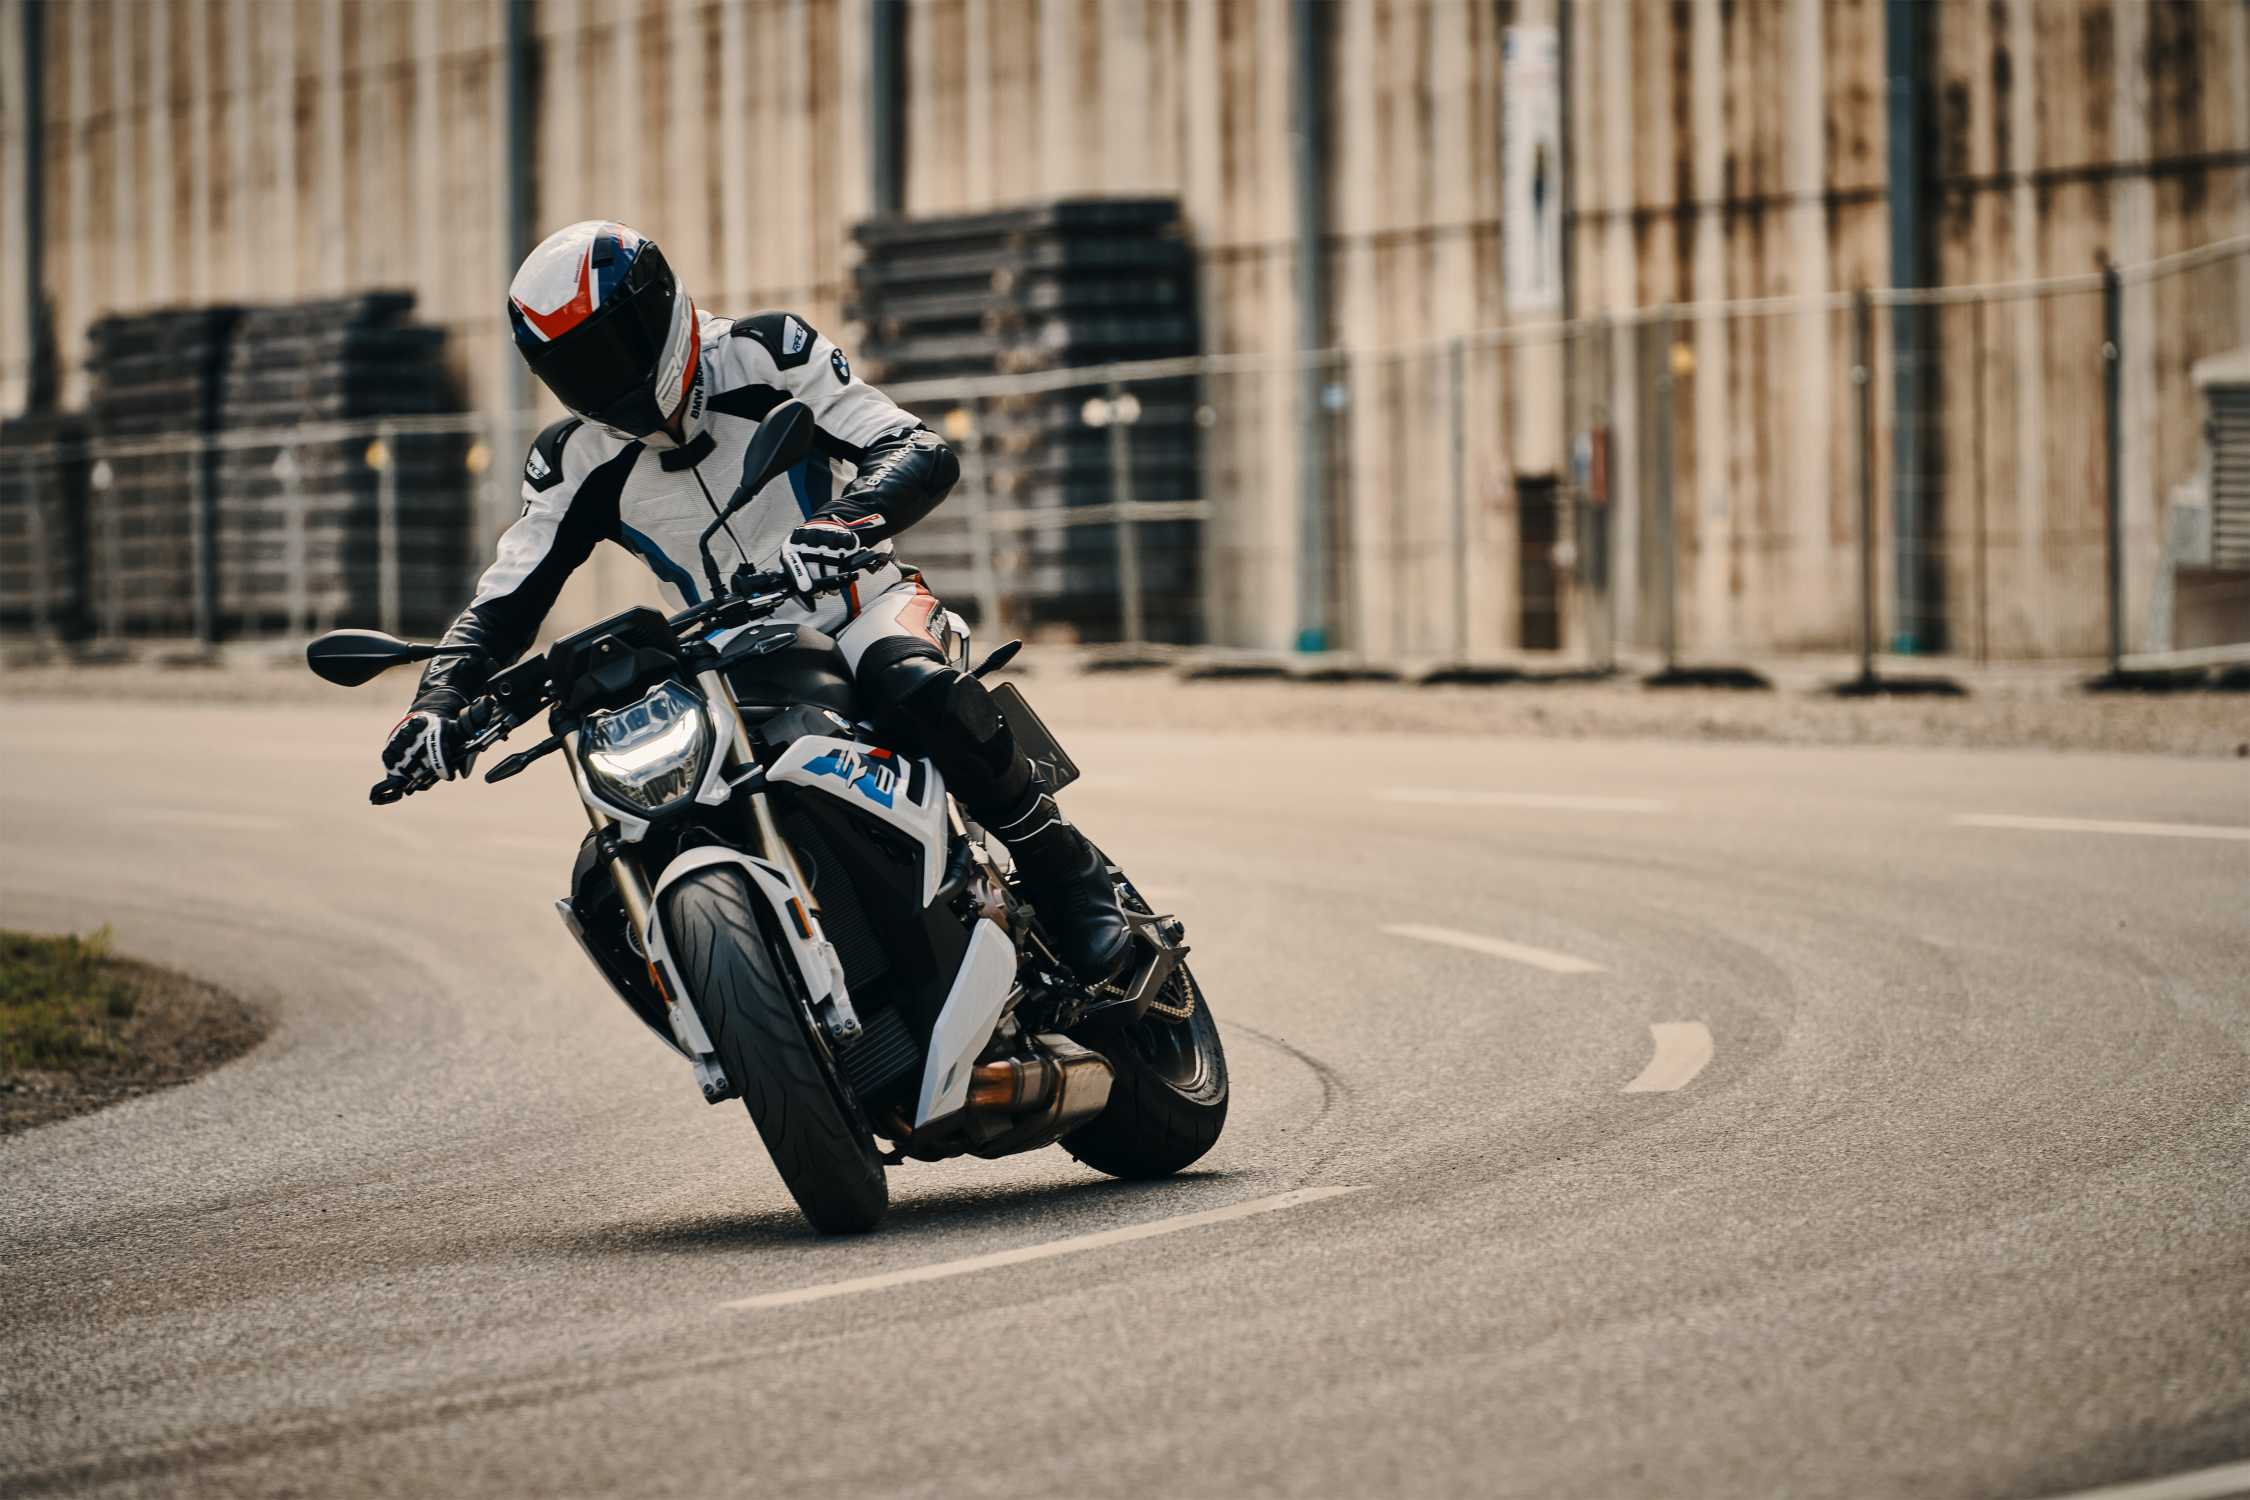 The new BMW S 1000 R in action. (11/2020)